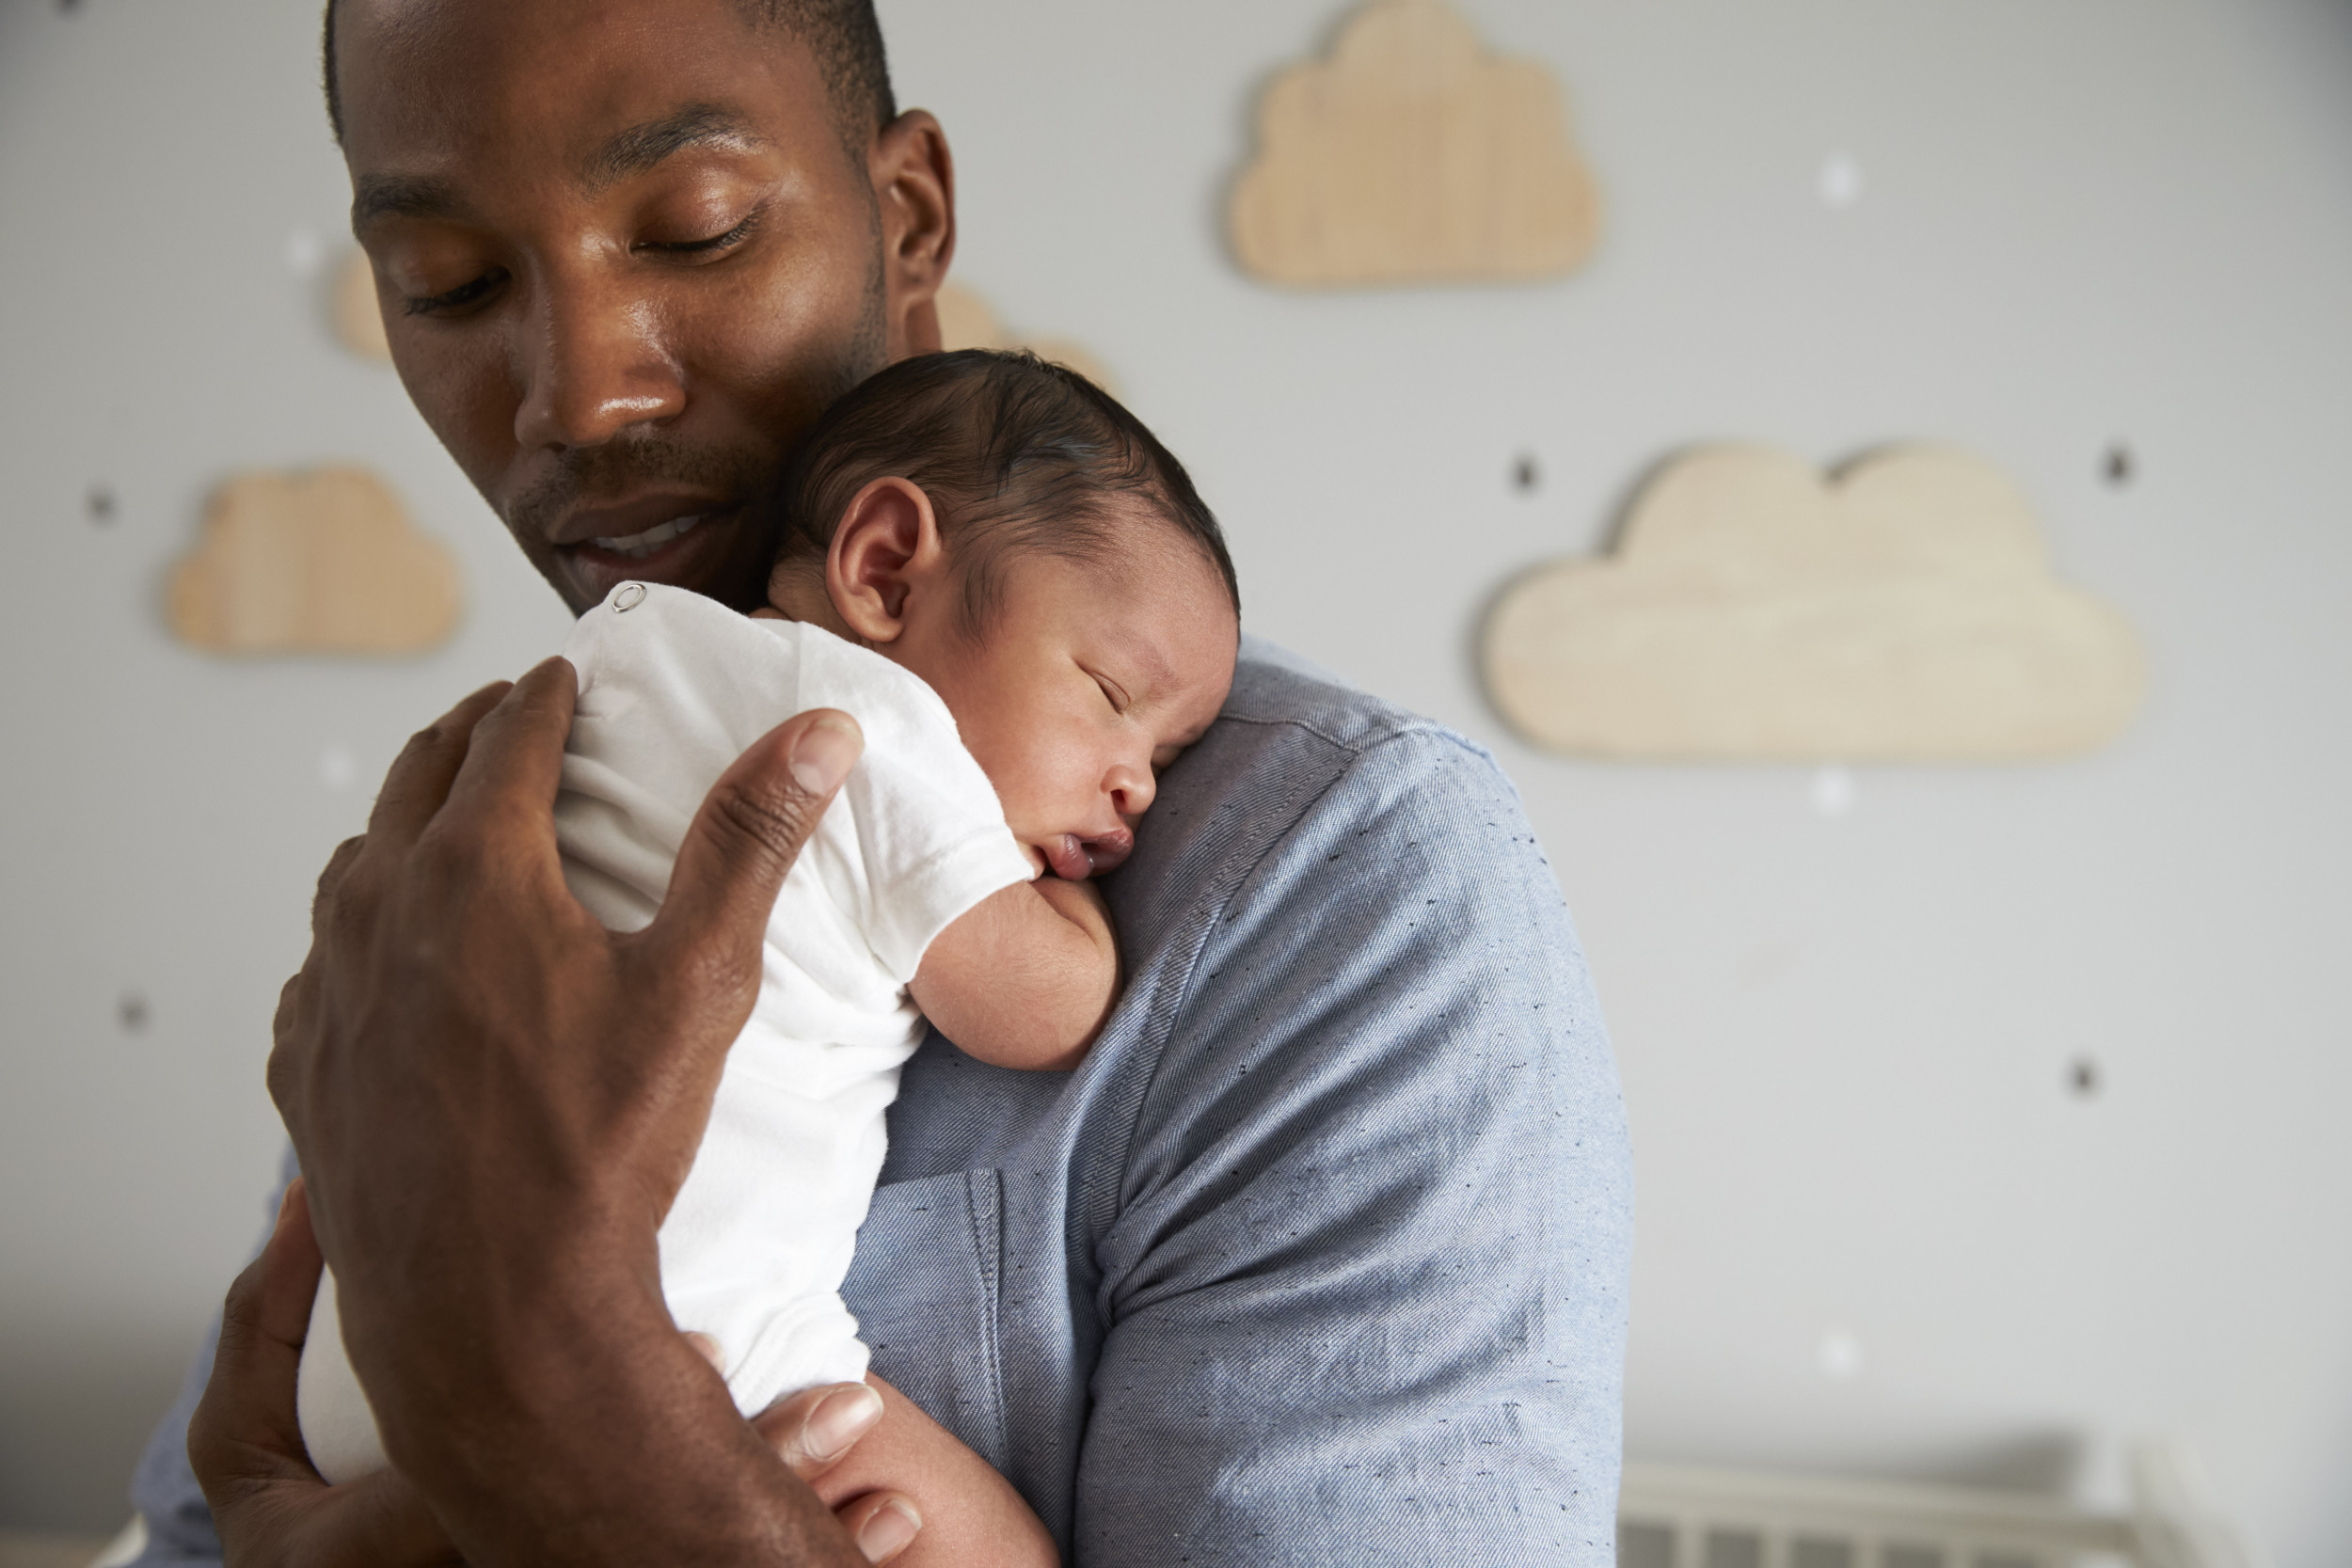 Irresponsible New Dad Slammed For Falling Asleep With Daughter In Arms